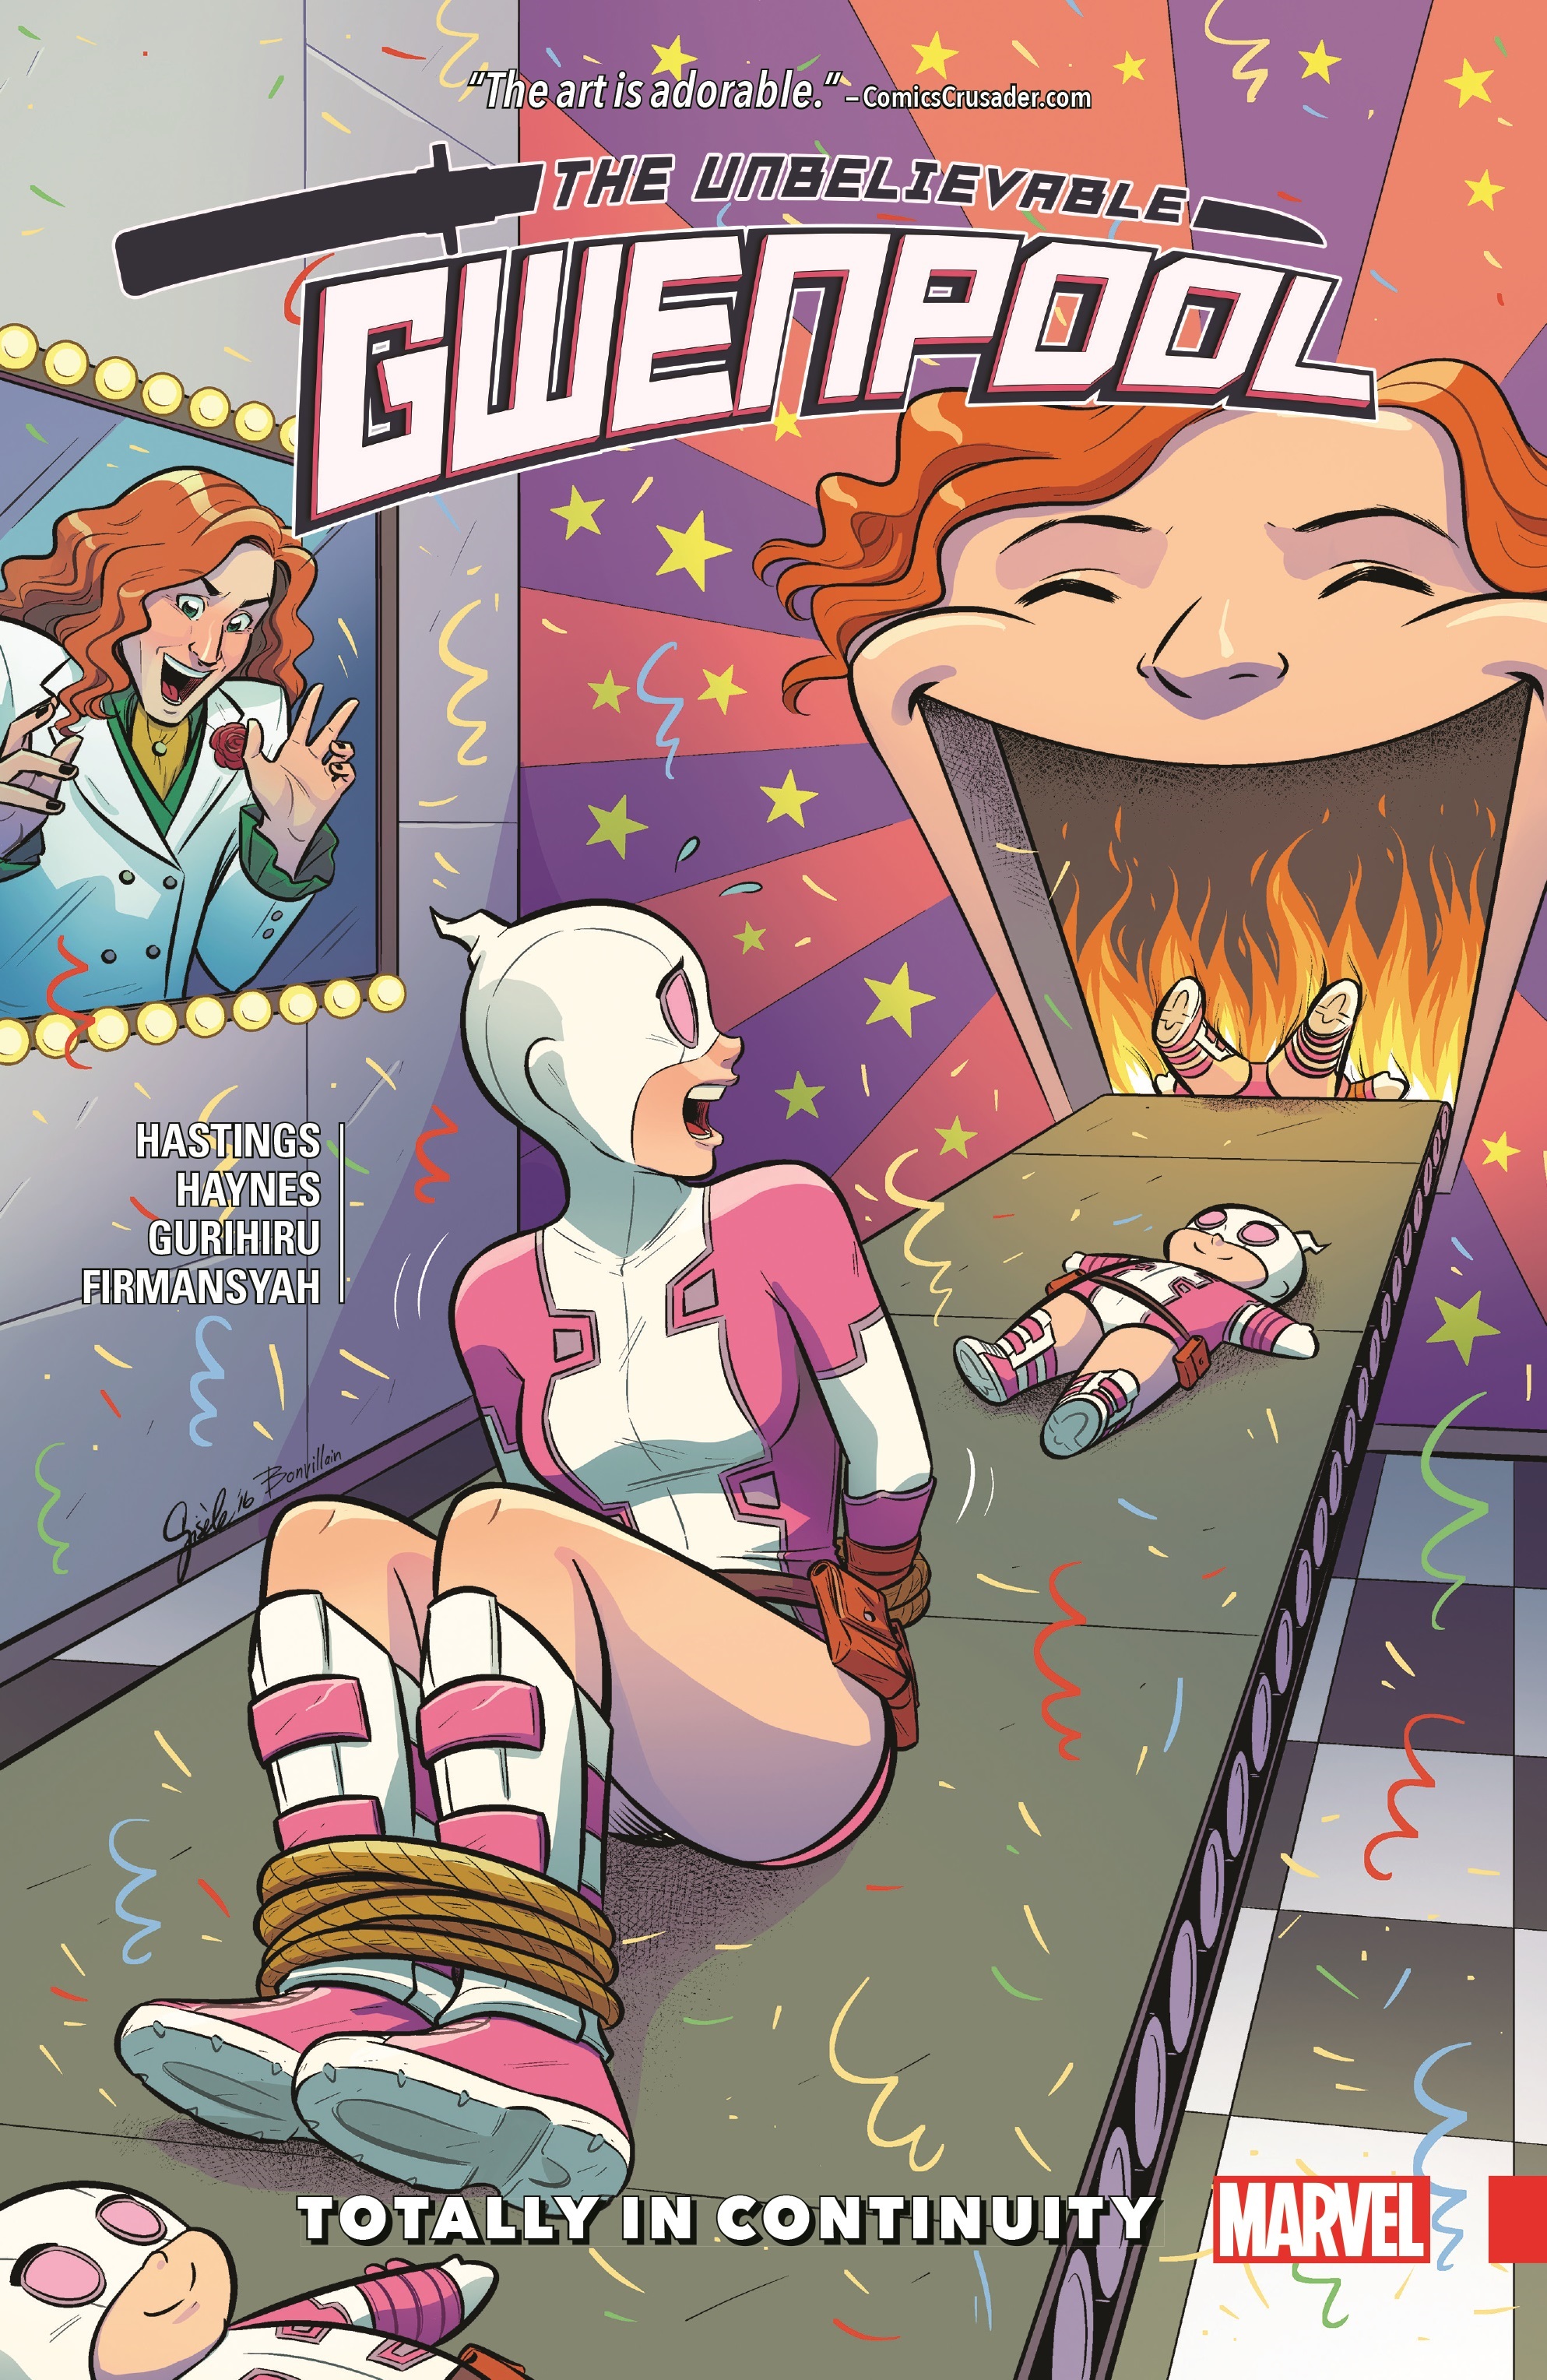 Gwenpool, The Unbelievable Vol. 3: Totally In Continuity (Trade Paperback)